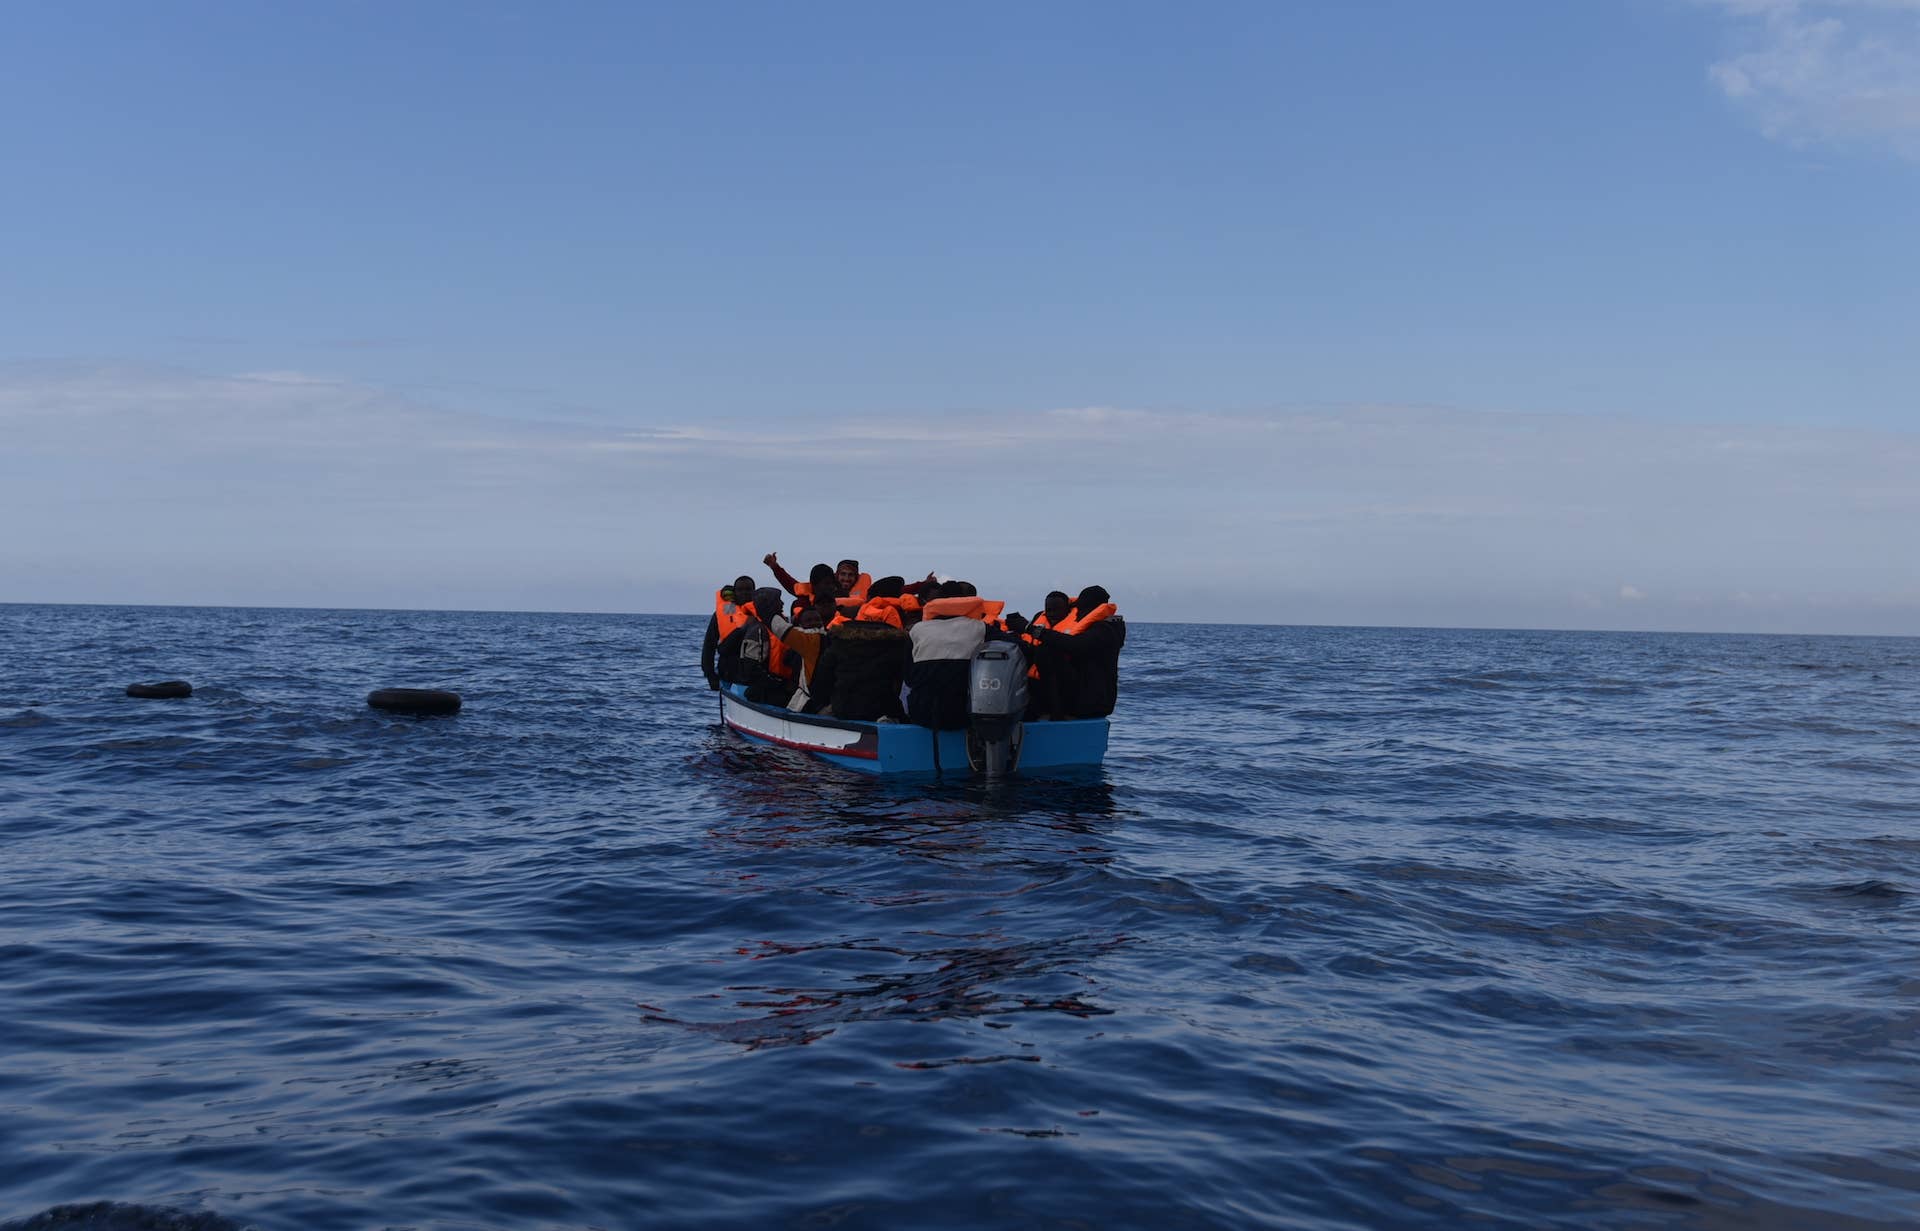 A small wooden boat carrying about 35 migrants capsized off the Libyan coast